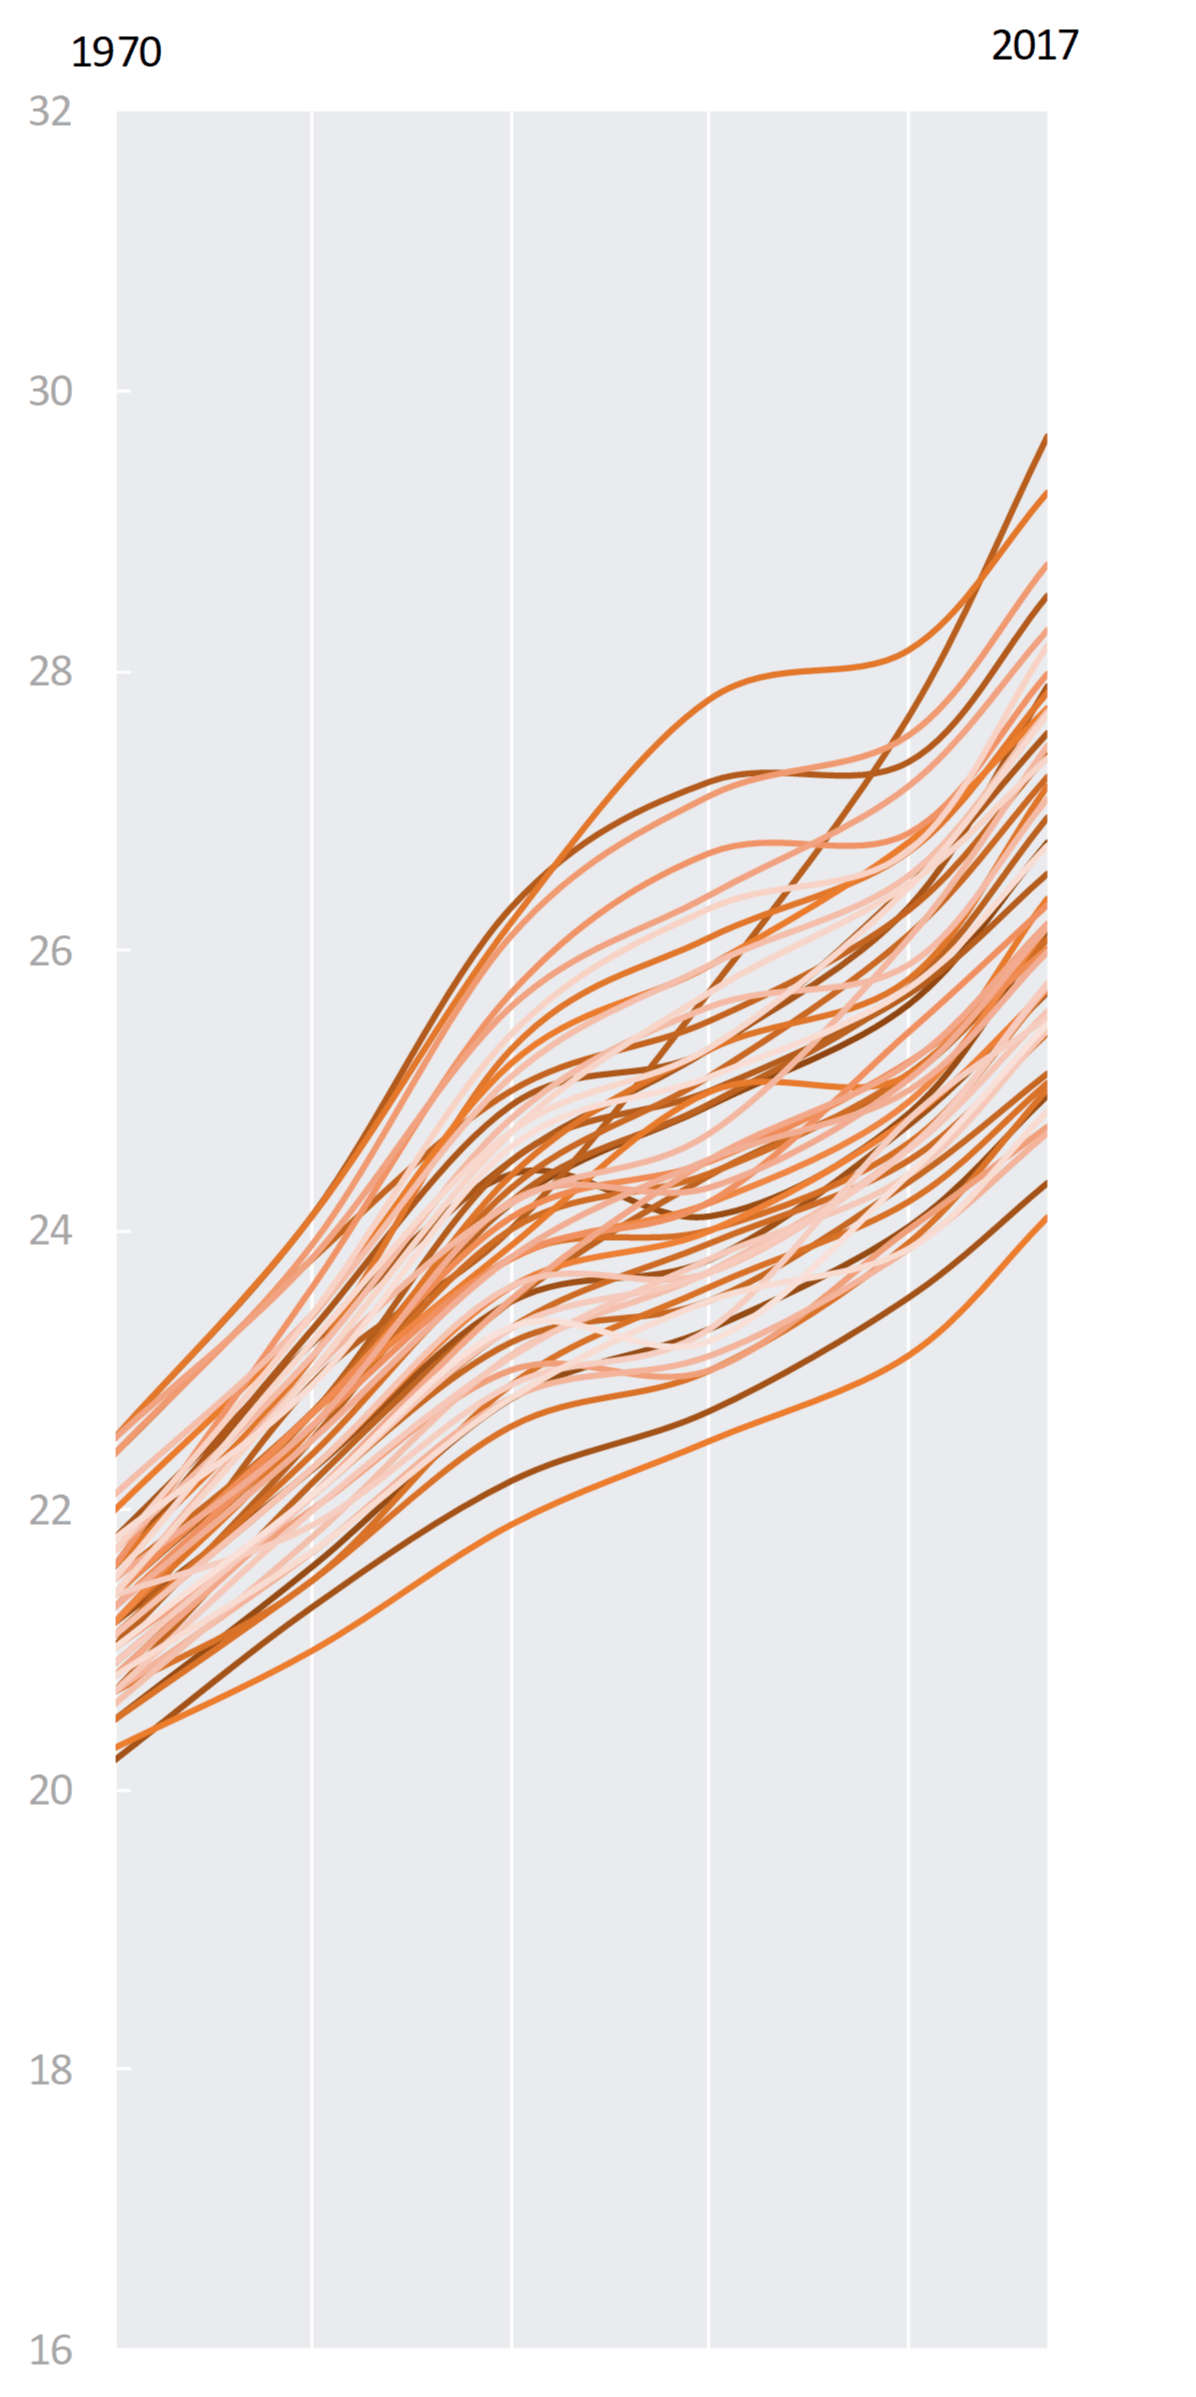 line chart in shades of orange showing state-level trends in mean maternal ages of first births, 1970-2017